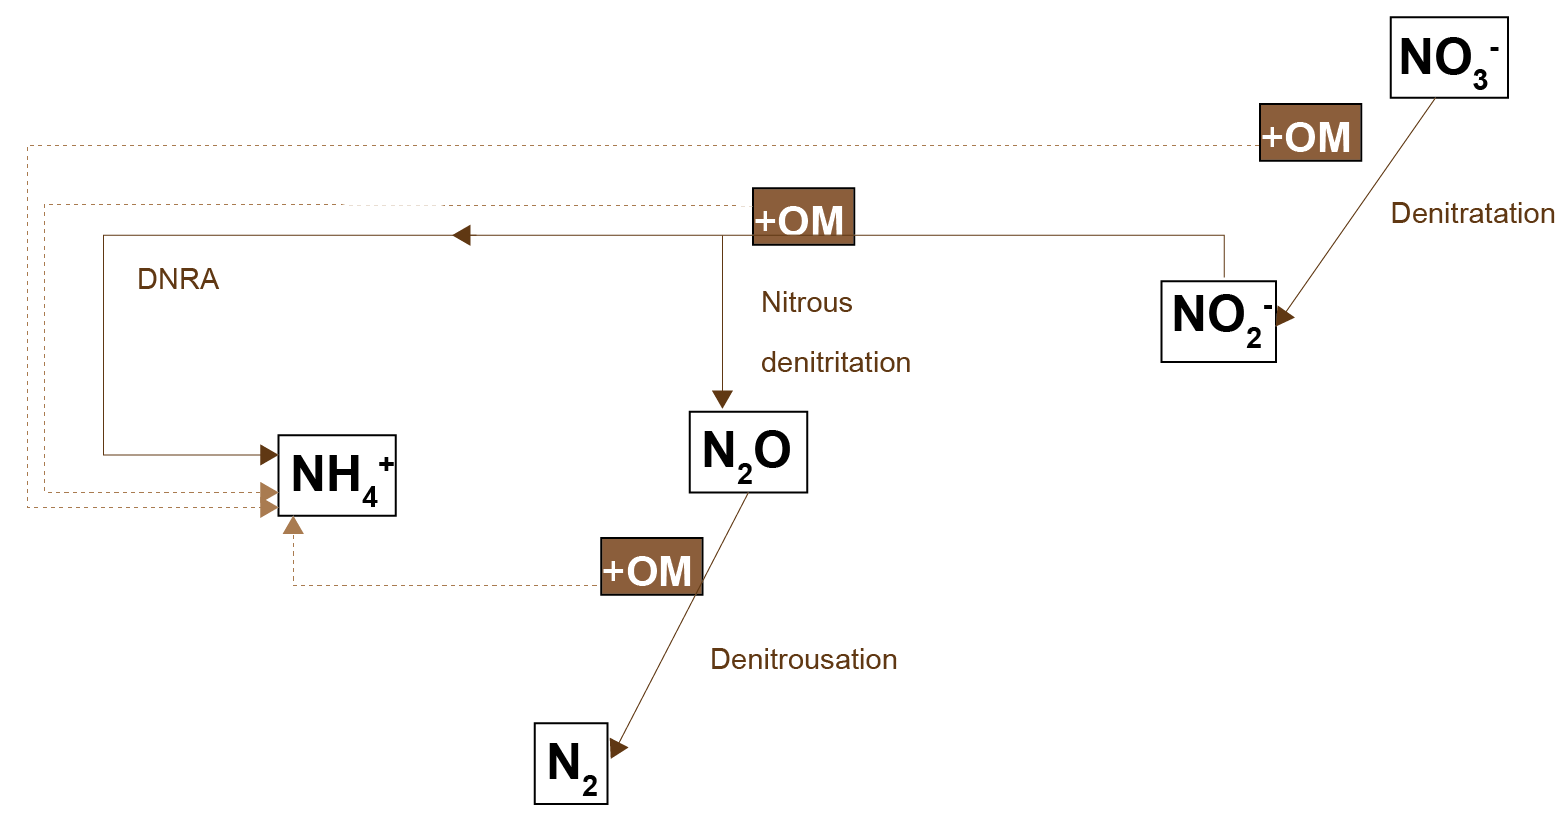 Schematic of the nitrogen-organic matter redox processes used in the CANDI-AED model.